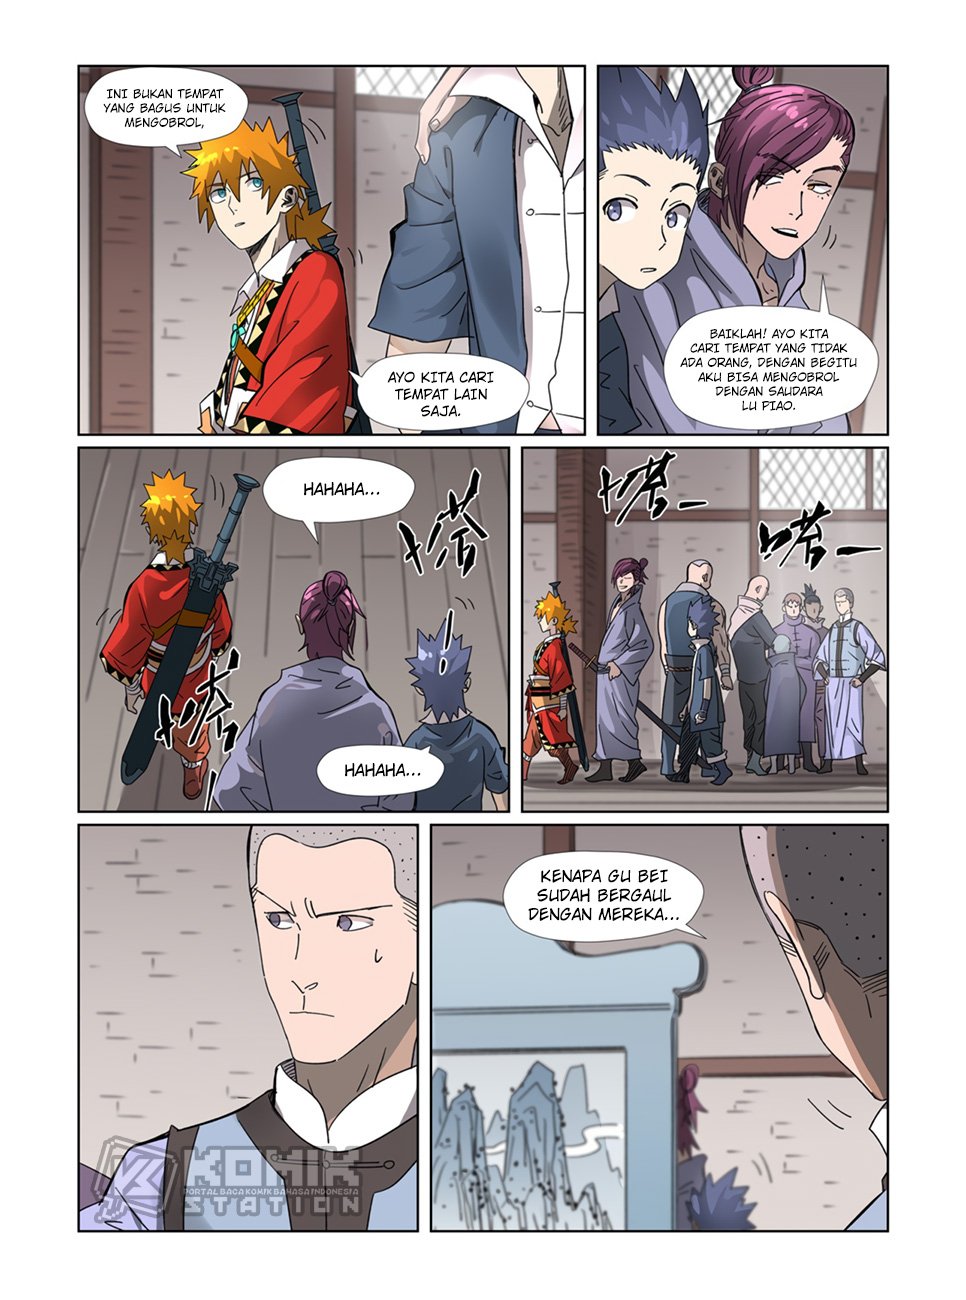 Tales of Demons and Gods Chapter 306-5